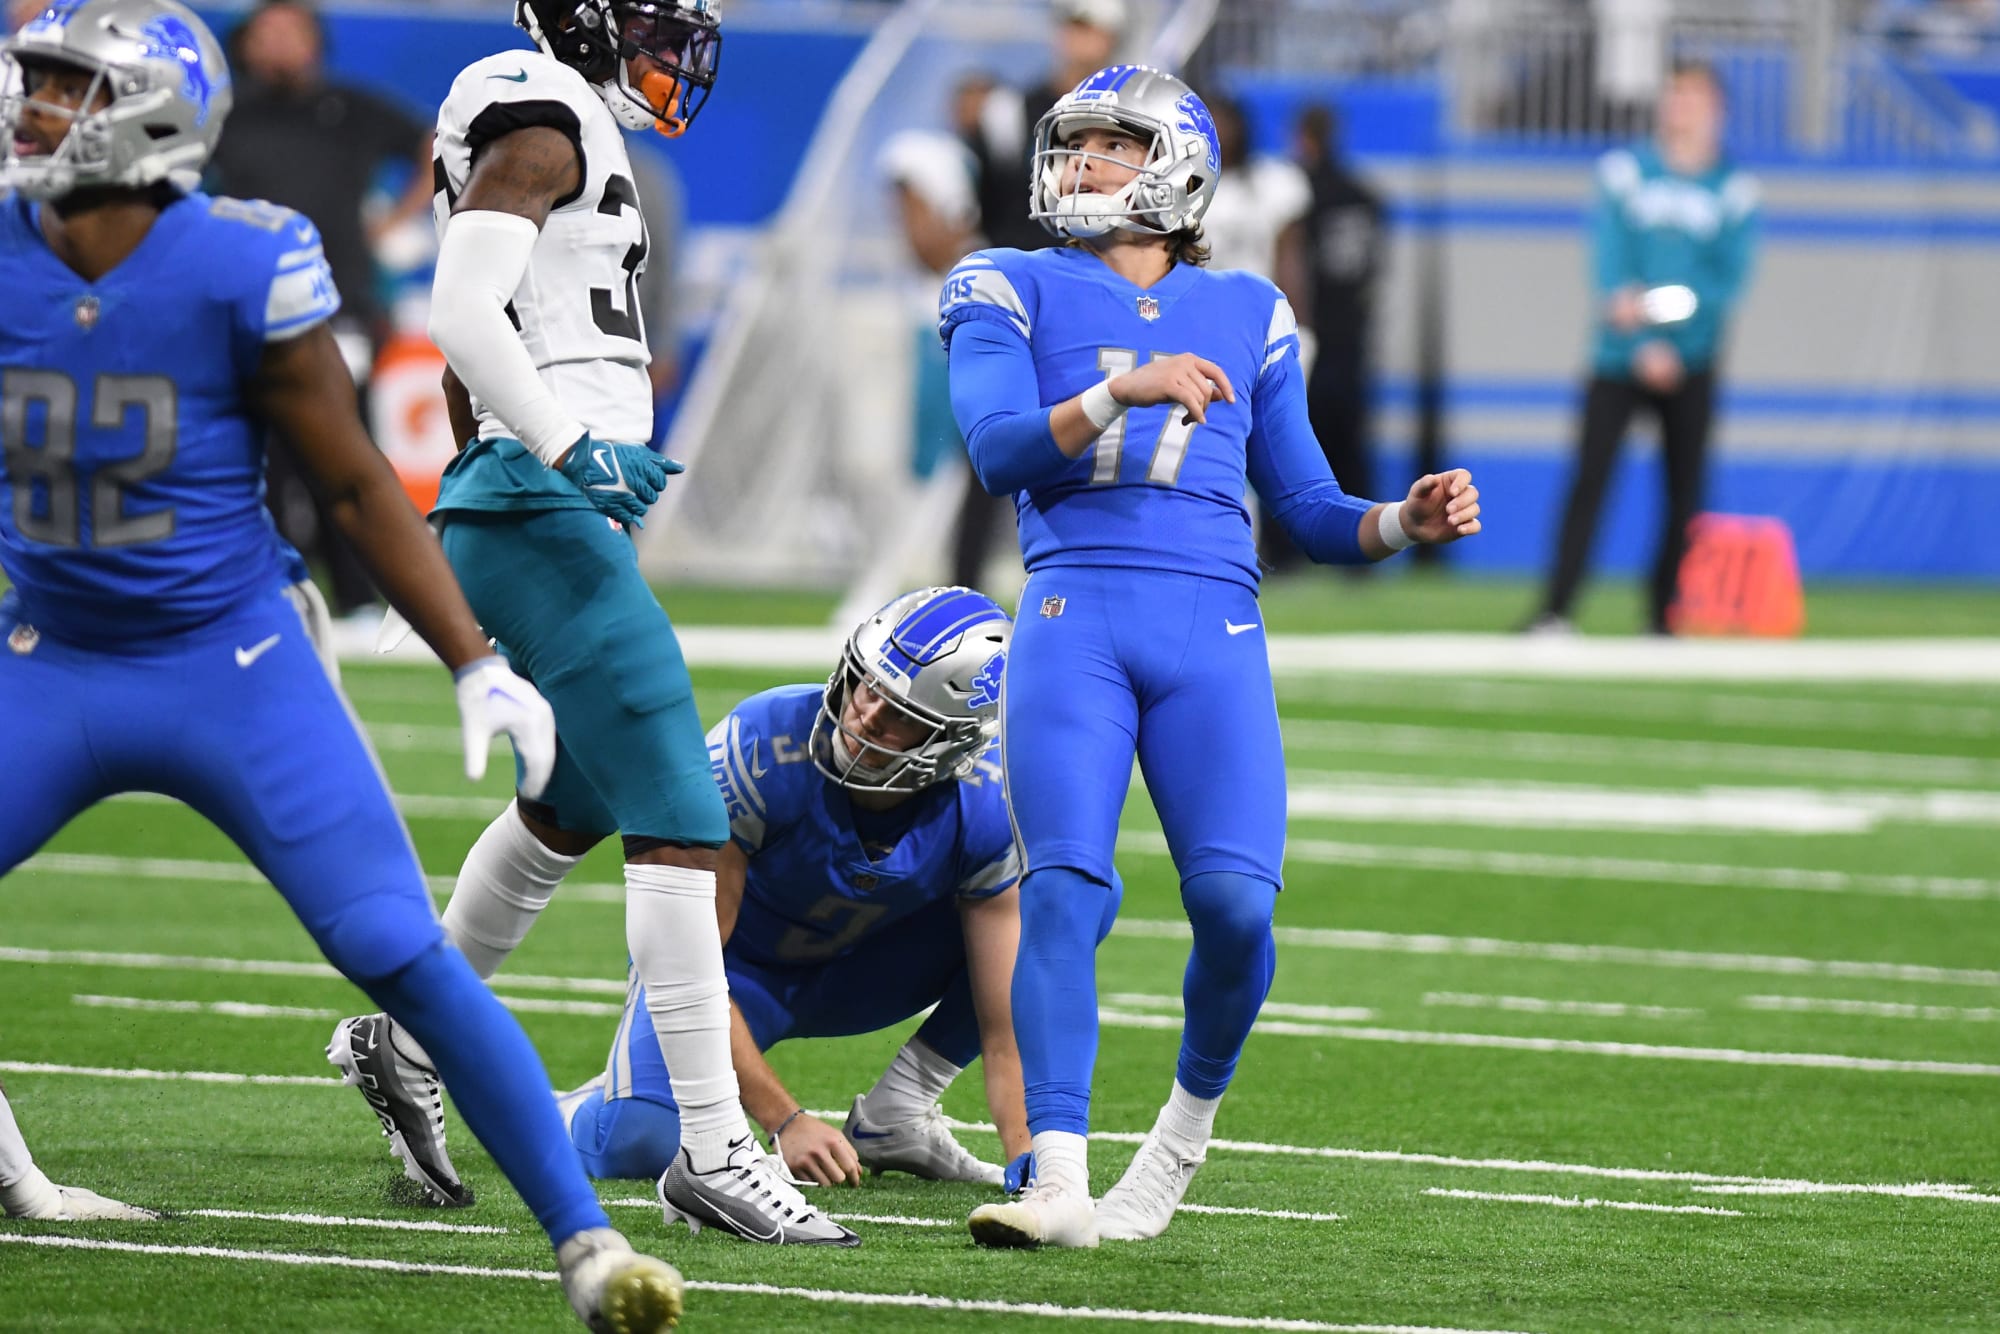 Lions kicker Michael Badgley wins NFC Special Teams Player of the Week